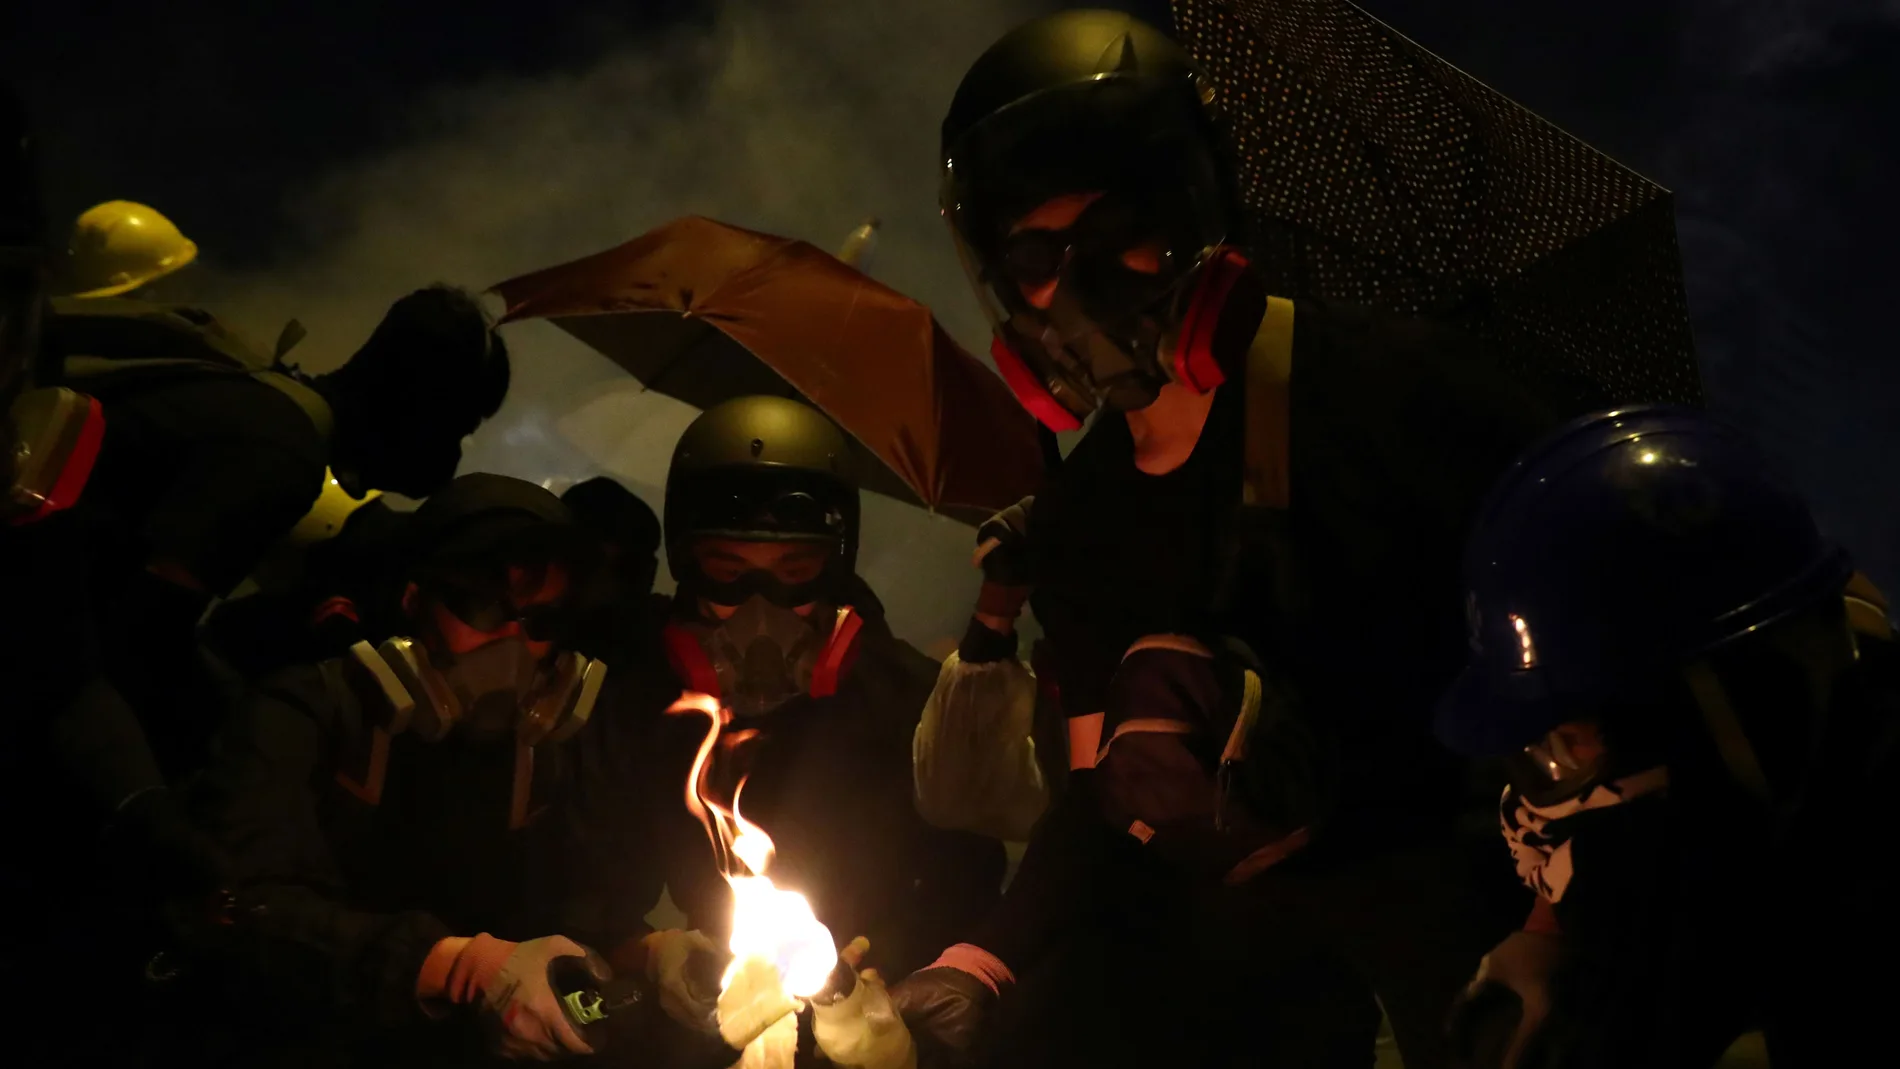 Anti-government protesters prepare molotov cocktails during clashes with police, outside Hong Kong Polytechnic University